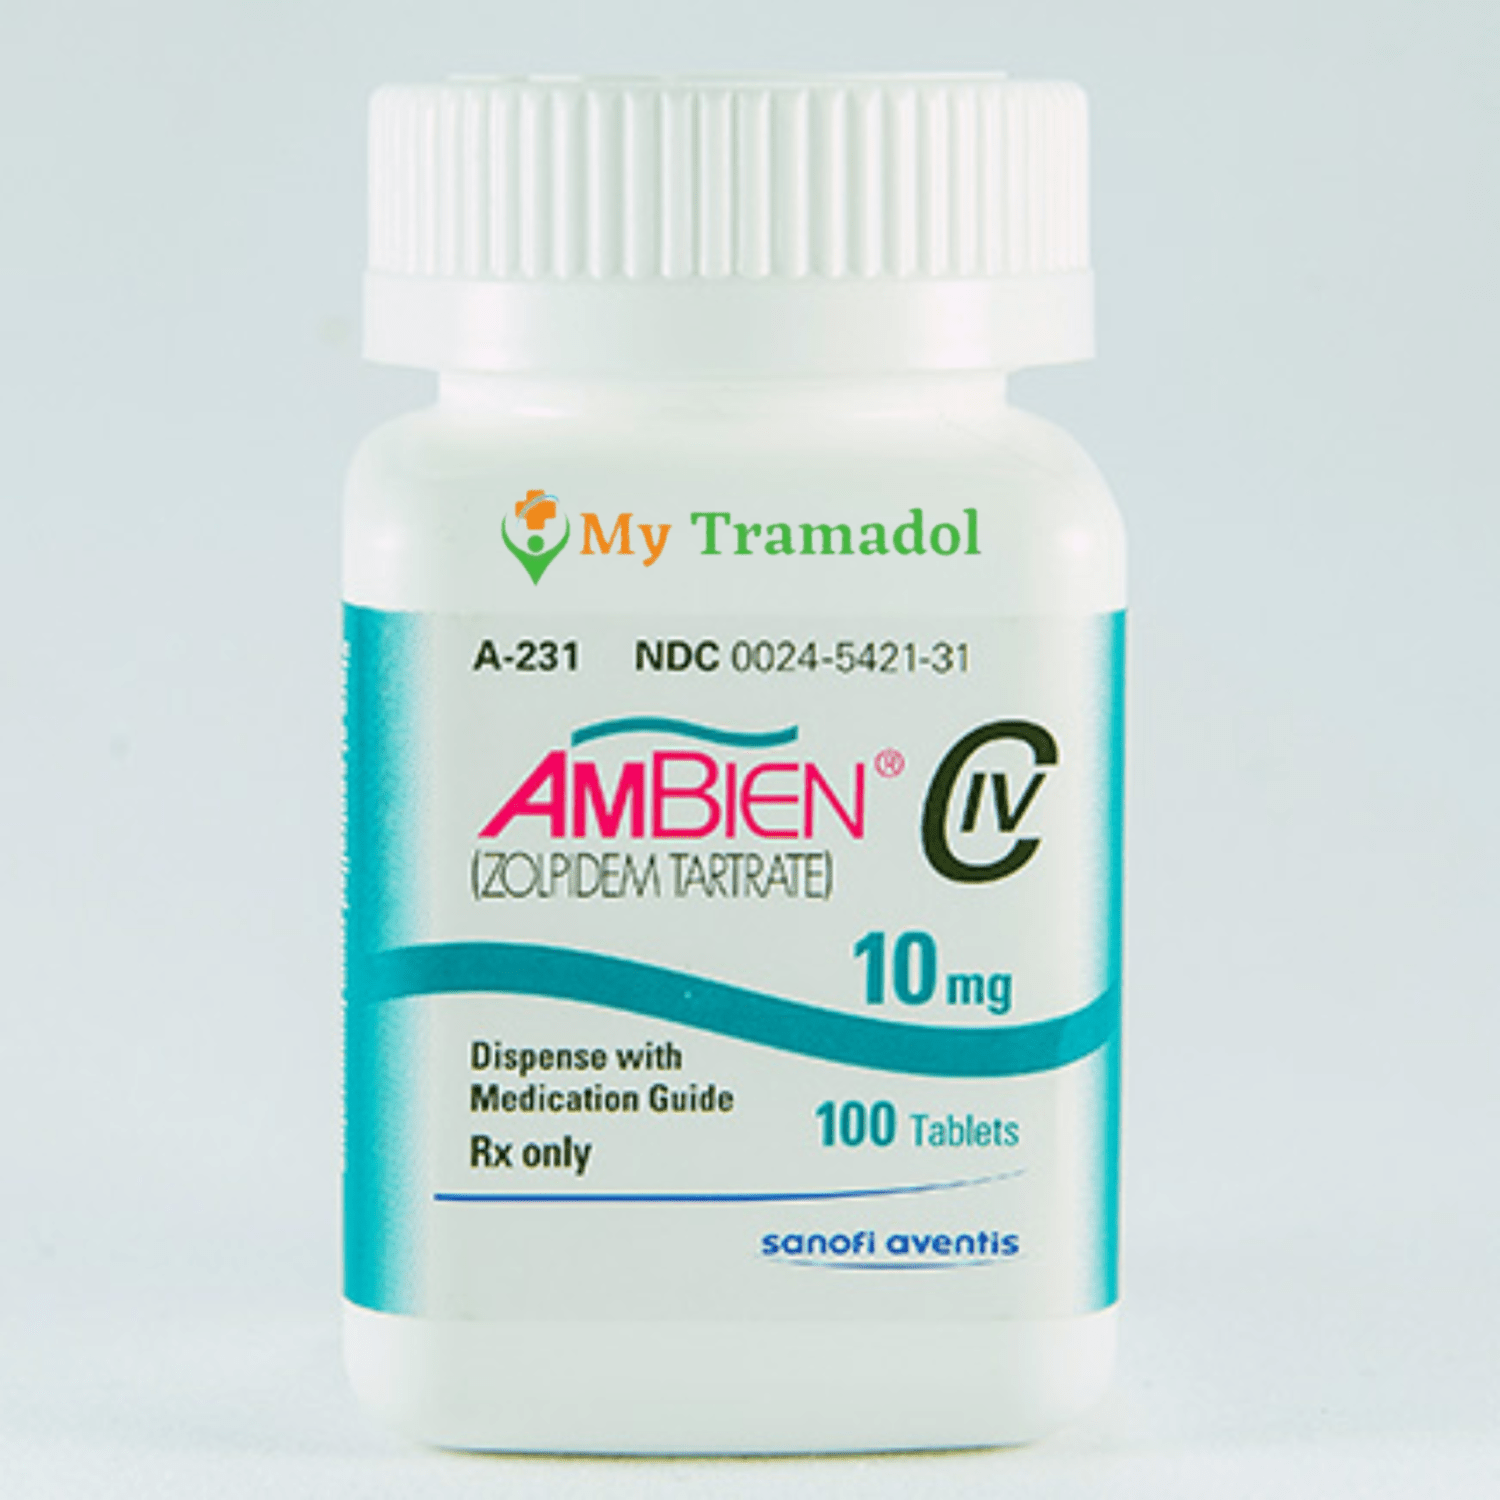 Buy Ambien 10mg Online Overnight  Zolpidem  MyTramadol - California - Chico ID1517006